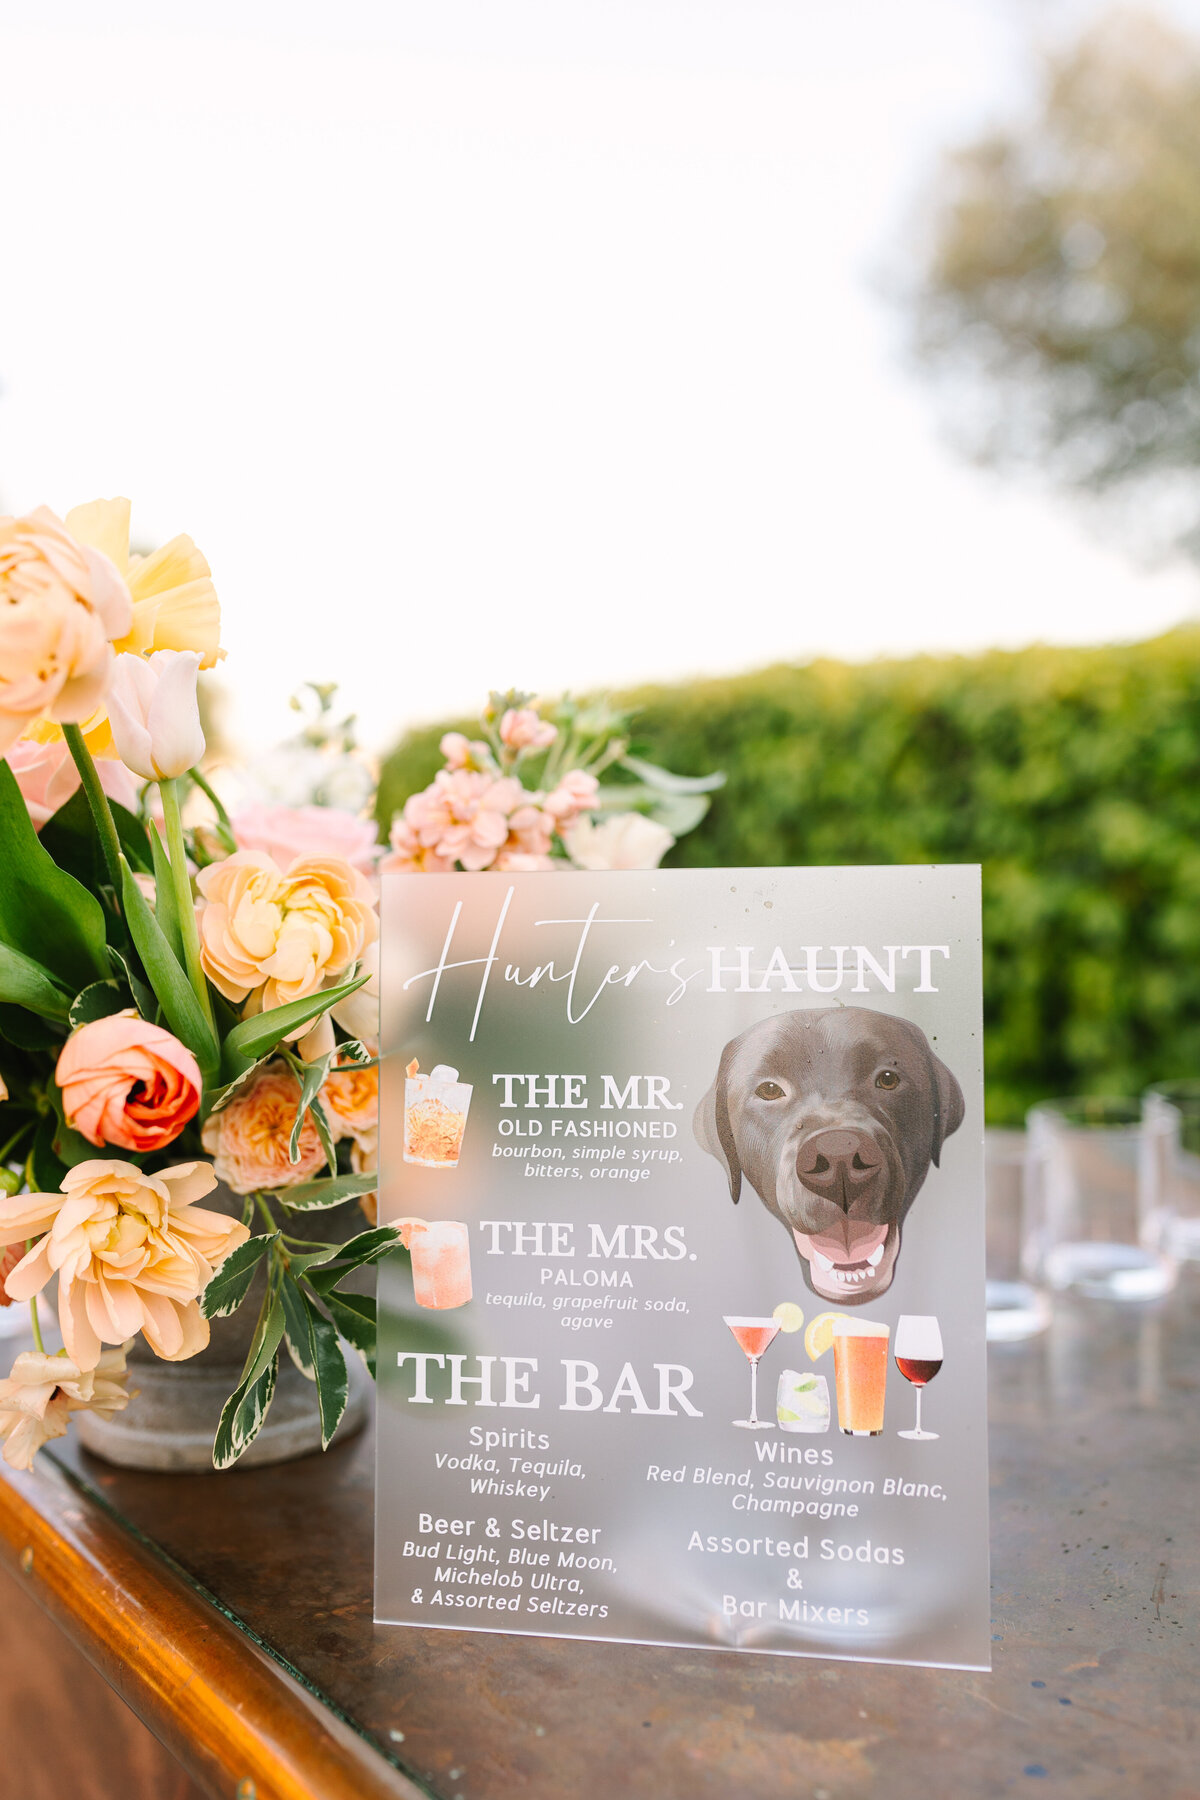 close-up image of bar menu with signature bride and groom cocktails.